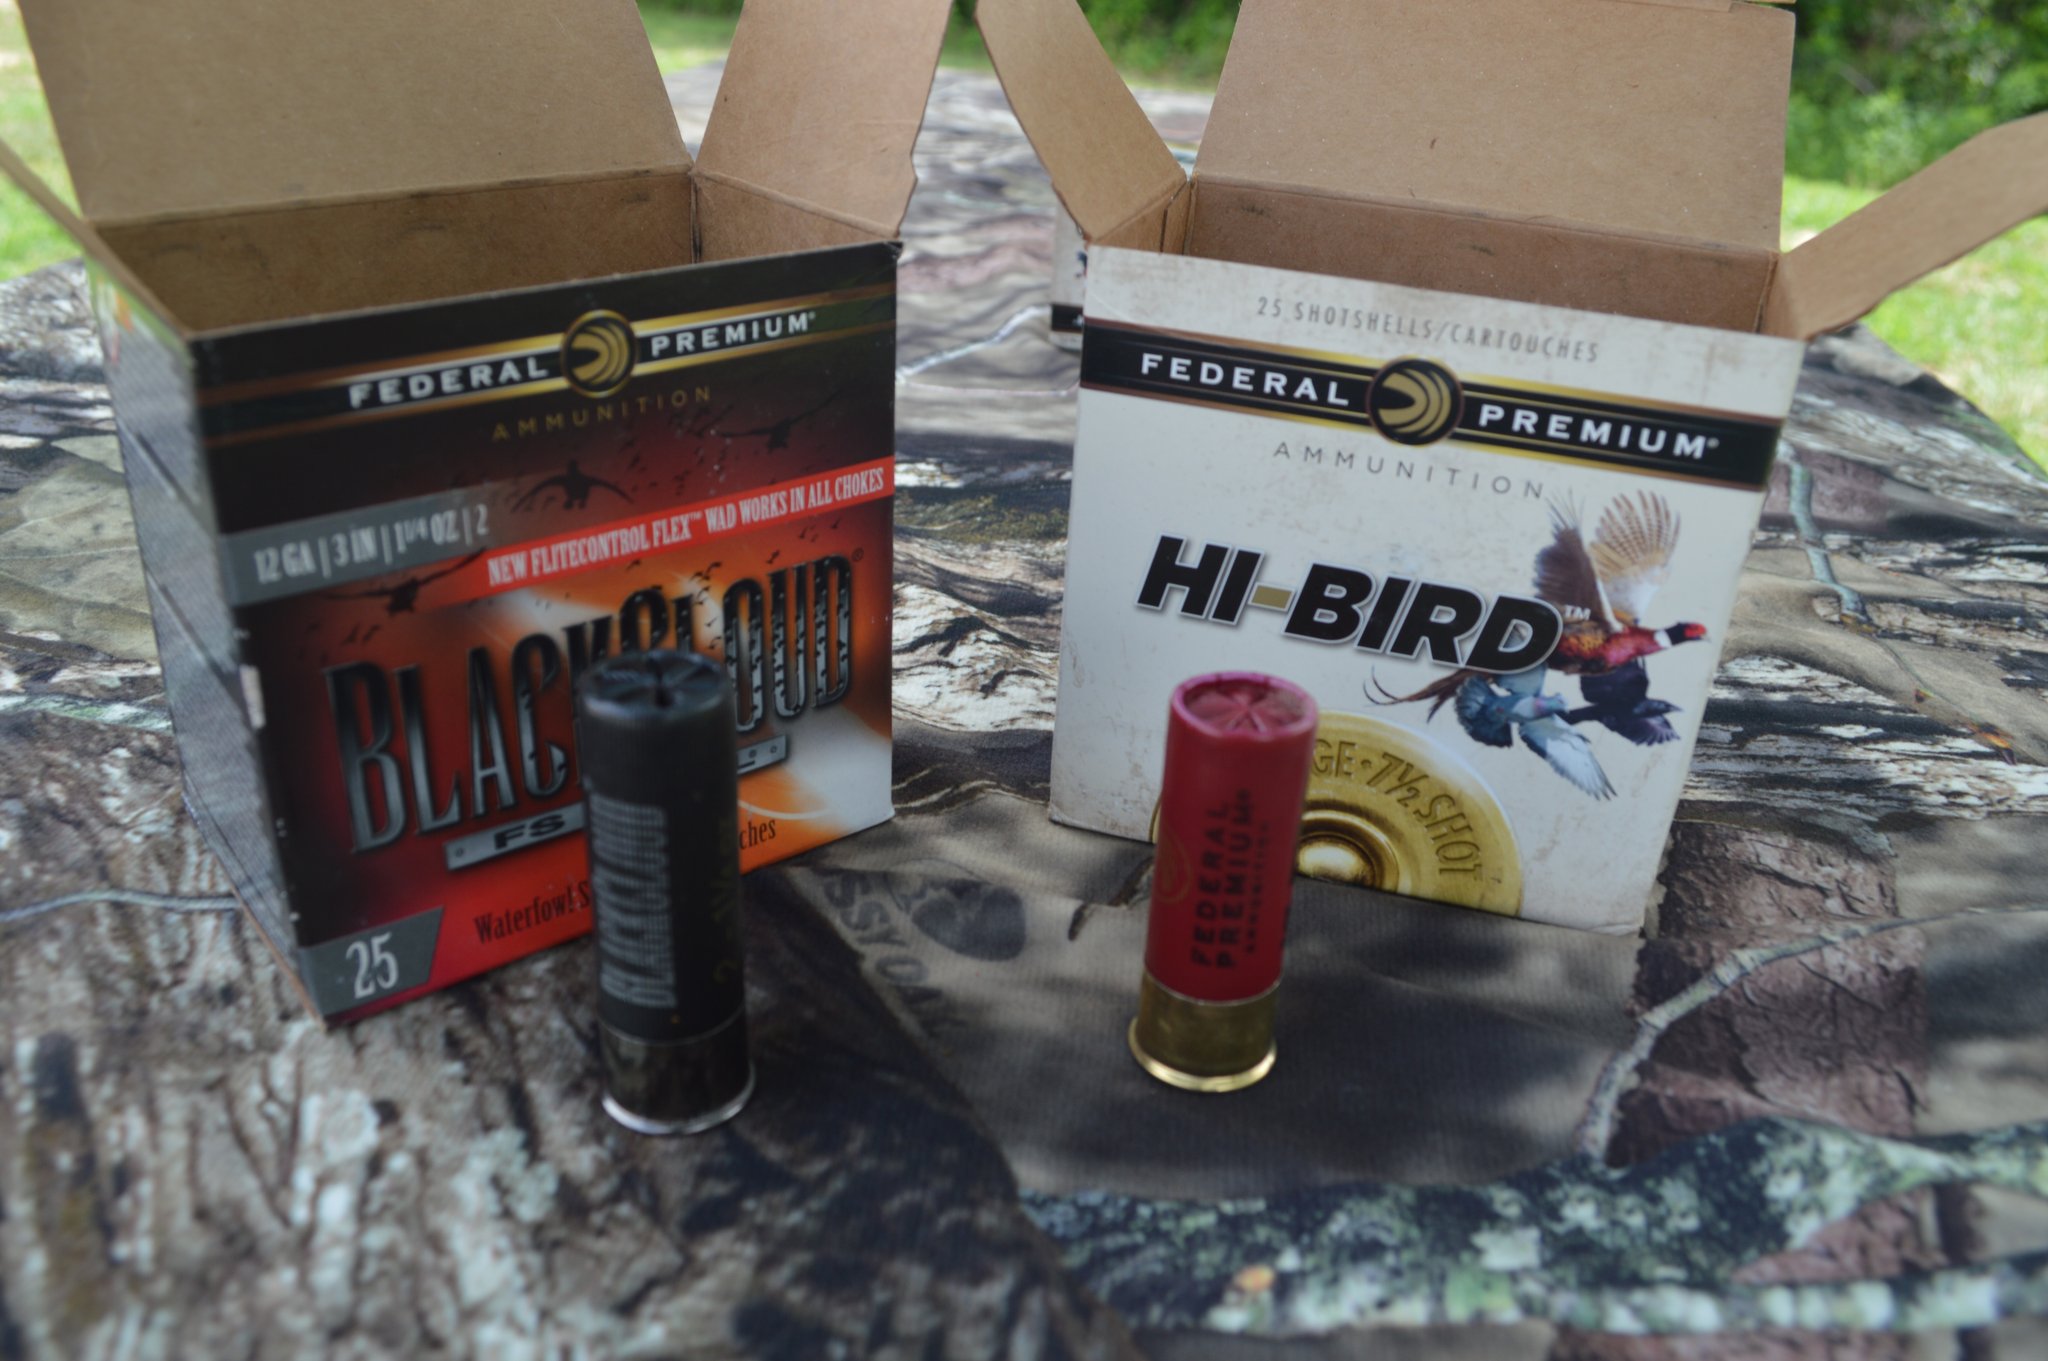 We shot clays with both of Federal Premium's shotgun rounds for hunters. The new Black Cloud features a re-designed wad that allows it to be fired from any choke, whereas previously Black Cloud could only be fired with one of the companies ammo-specific tubes. While the Black Cloud comes in heavier payloads and longer shell lenghths for waterfowlers, Hi Bird has been released in 2-3/4" 12-gauge options for upland game like doves, pigeons, and pheasants. The wad technology in Hi Bird is designed to decrease recoil and produce consistent patterns. (Photo: Kristin Alberts)